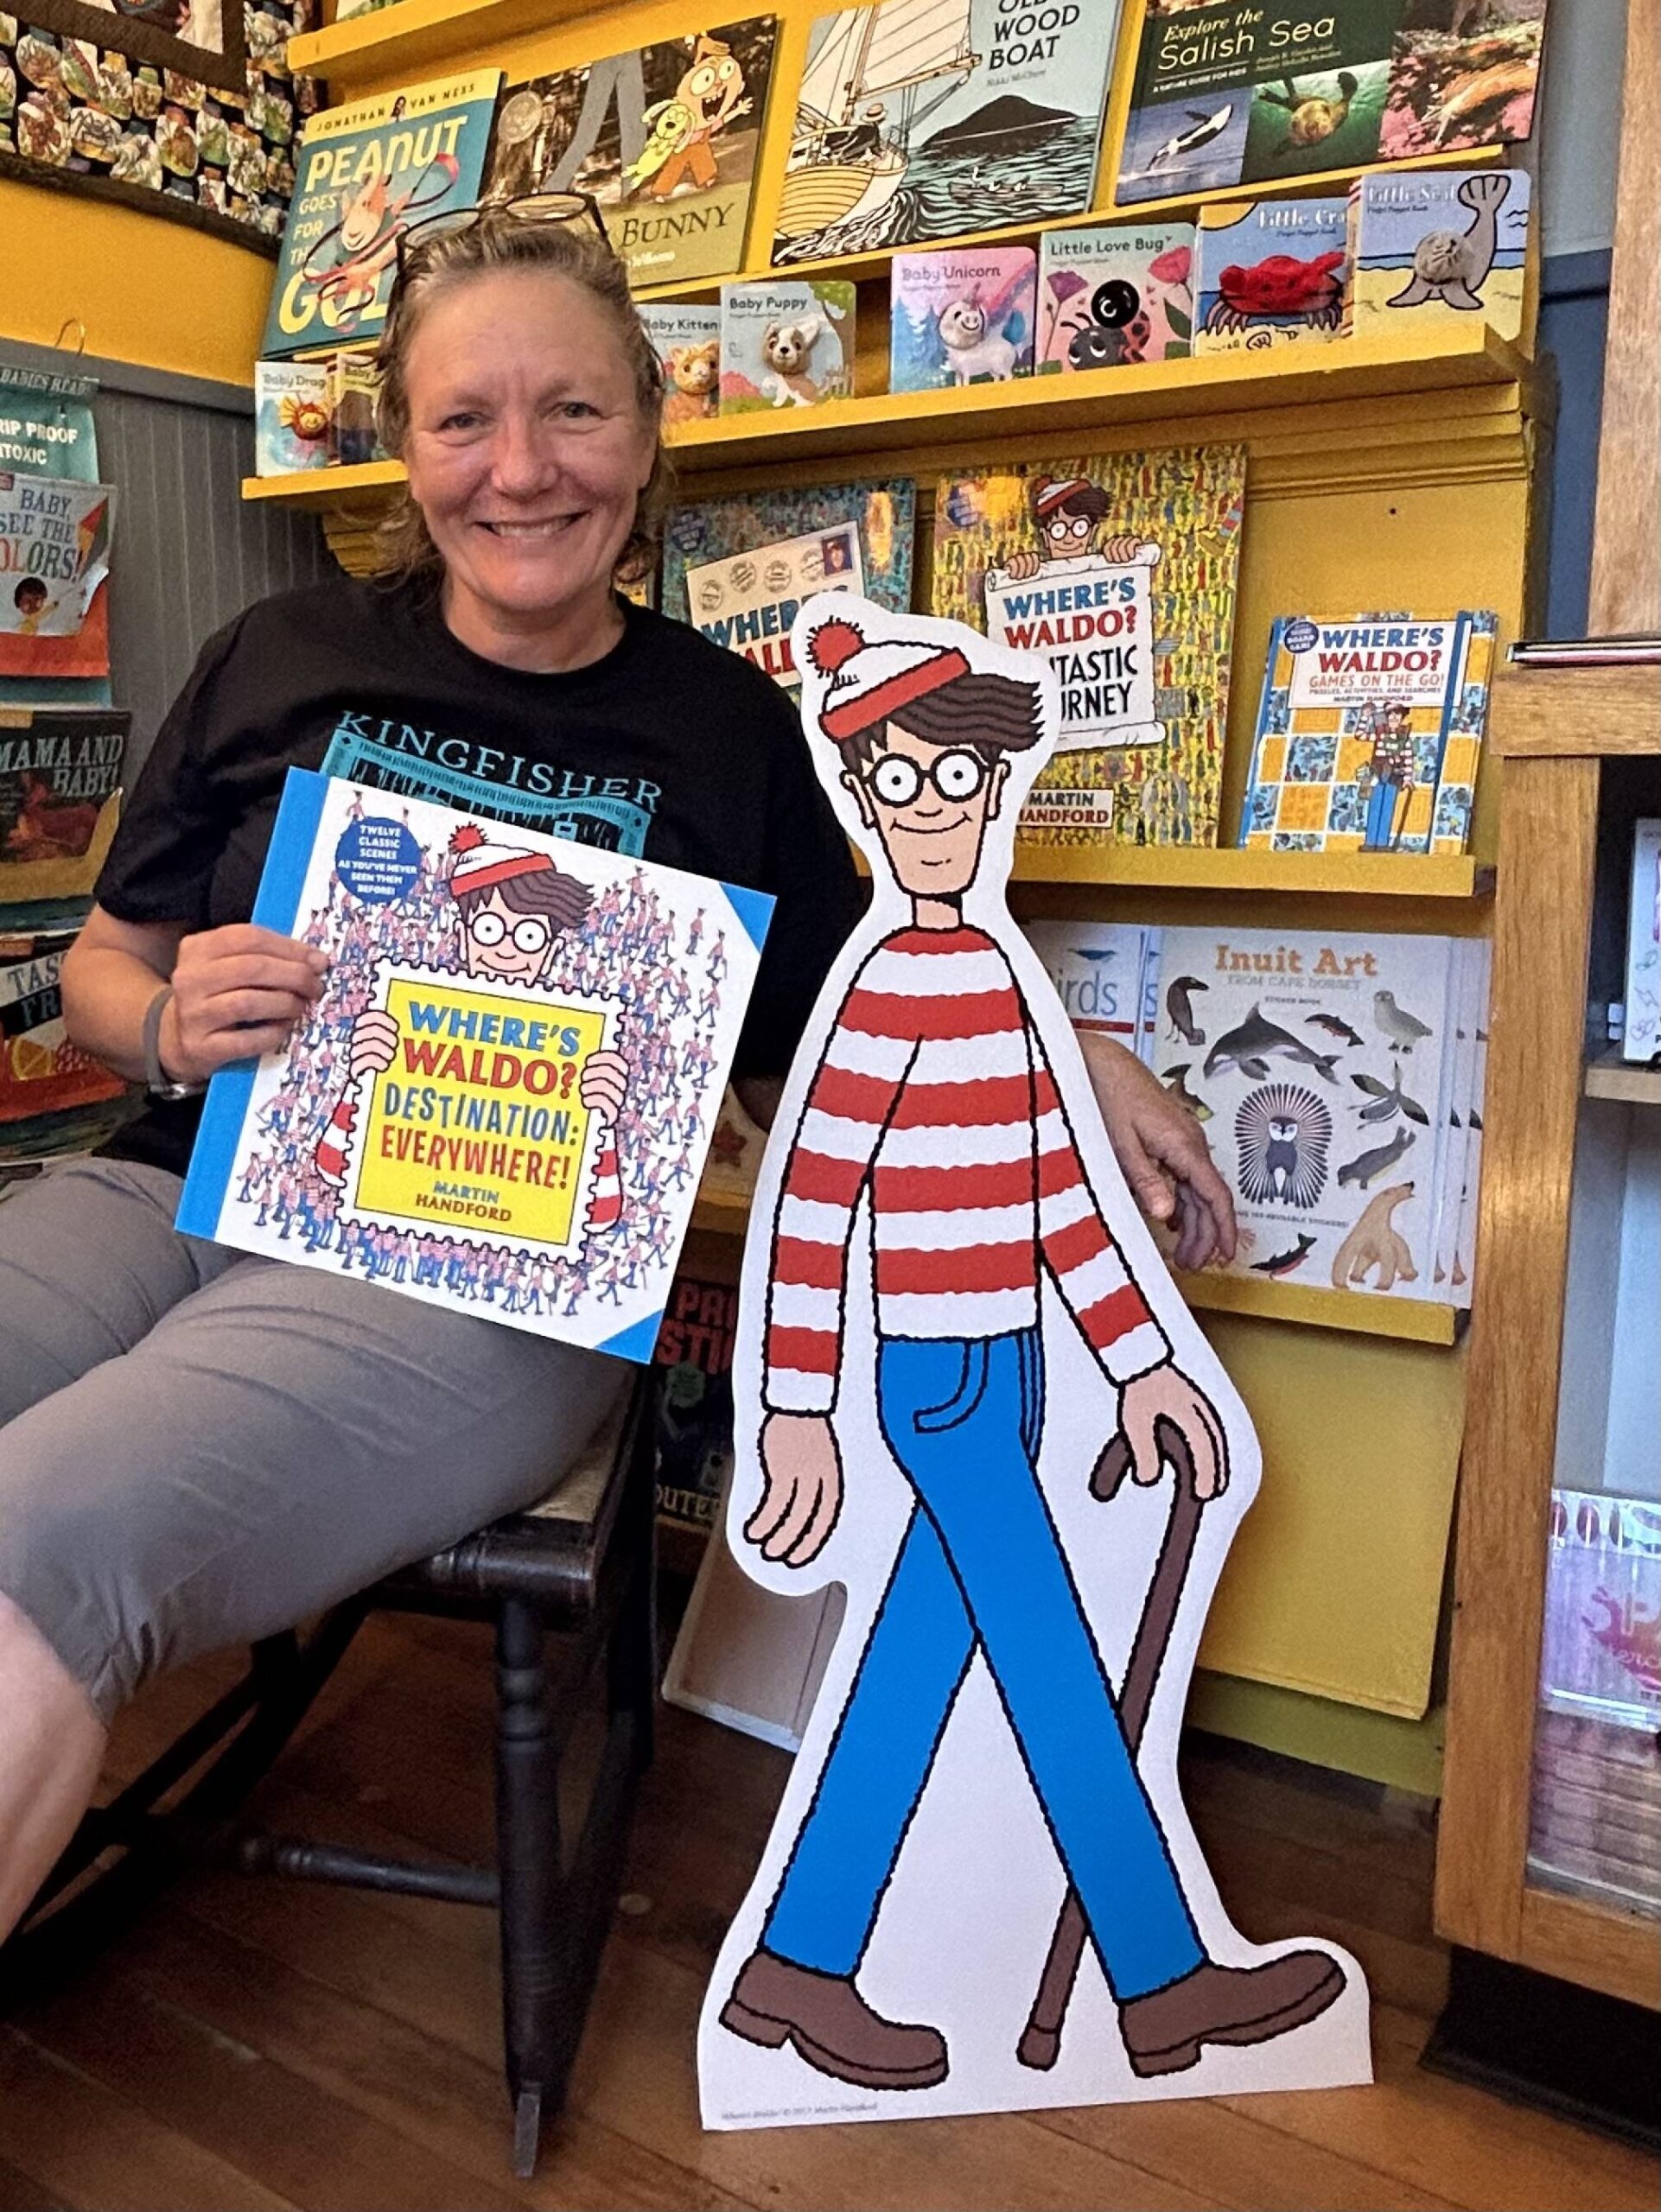 Photo provided
Meg Olson will welcome Waldo to her shop, Kingfisher Bookstore throughout the month of July.